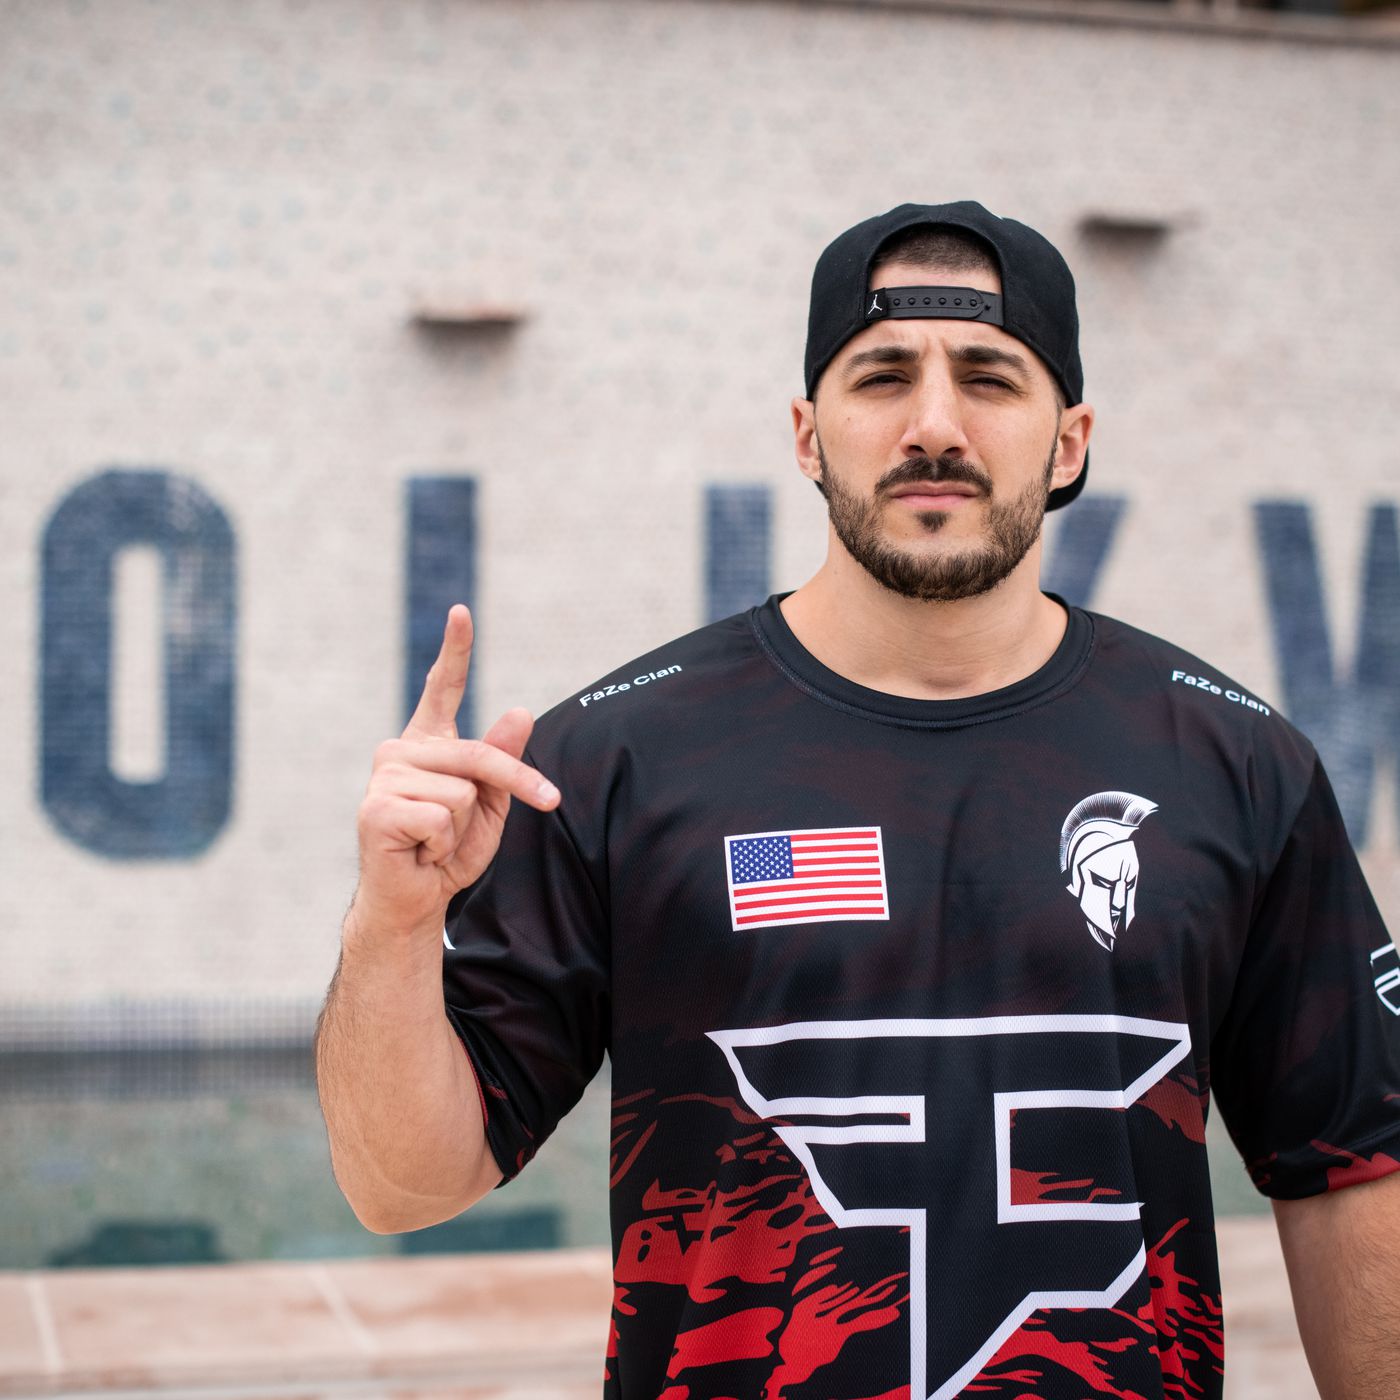 Nickmercs is a famous youtuber, twitch video game streamer and entertainer....